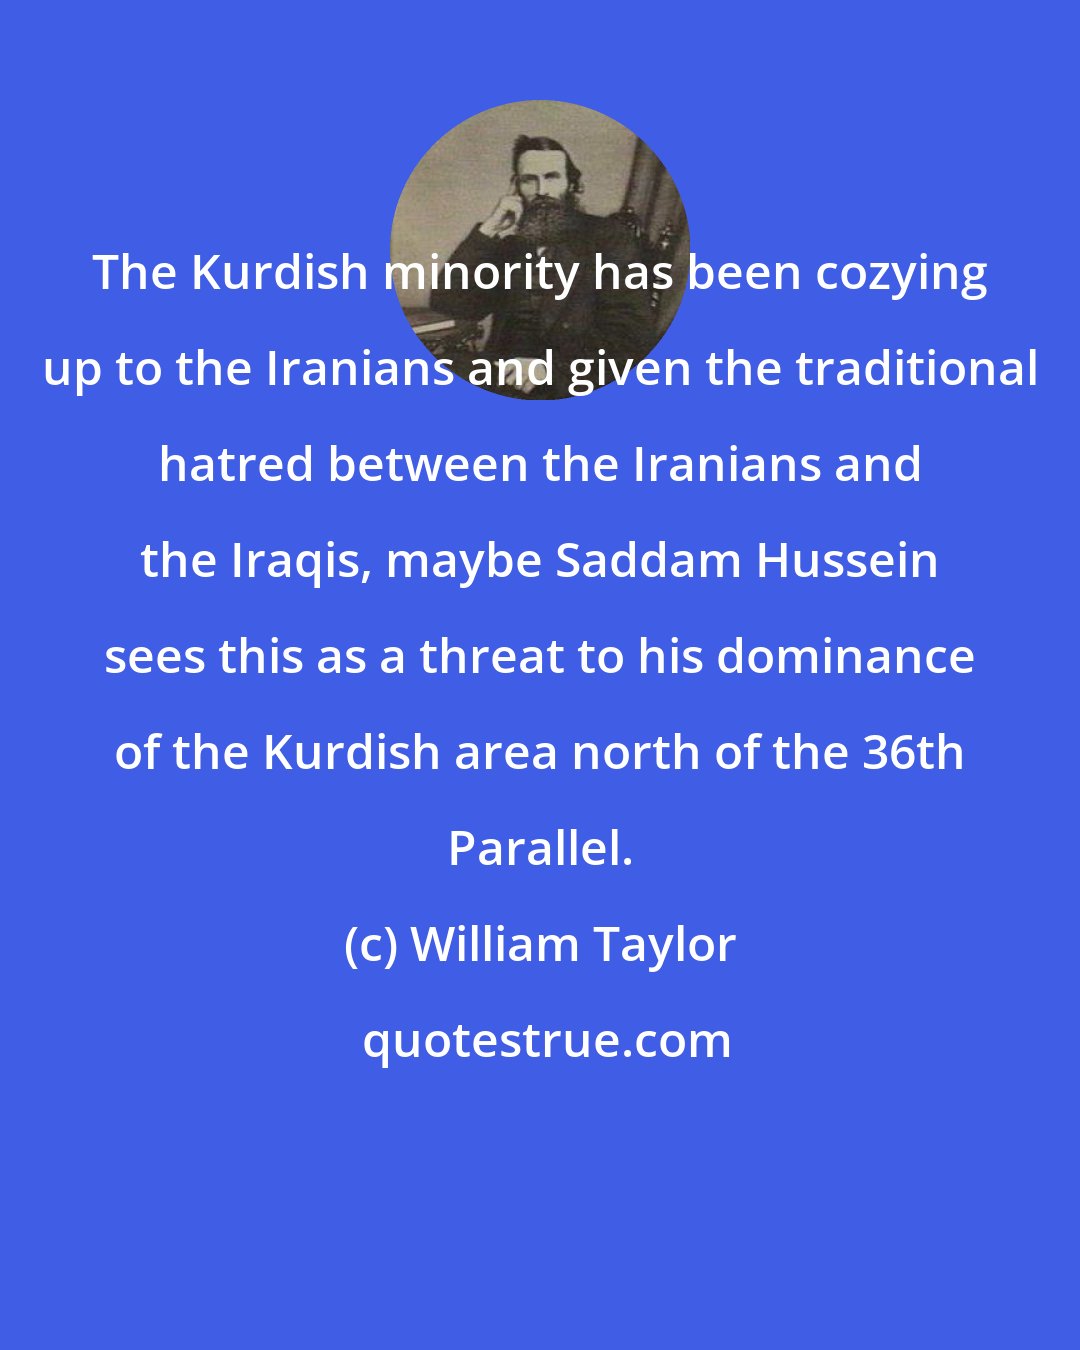 William Taylor: The Kurdish minority has been cozying up to the Iranians and given the traditional hatred between the Iranians and the Iraqis, maybe Saddam Hussein sees this as a threat to his dominance of the Kurdish area north of the 36th Parallel.